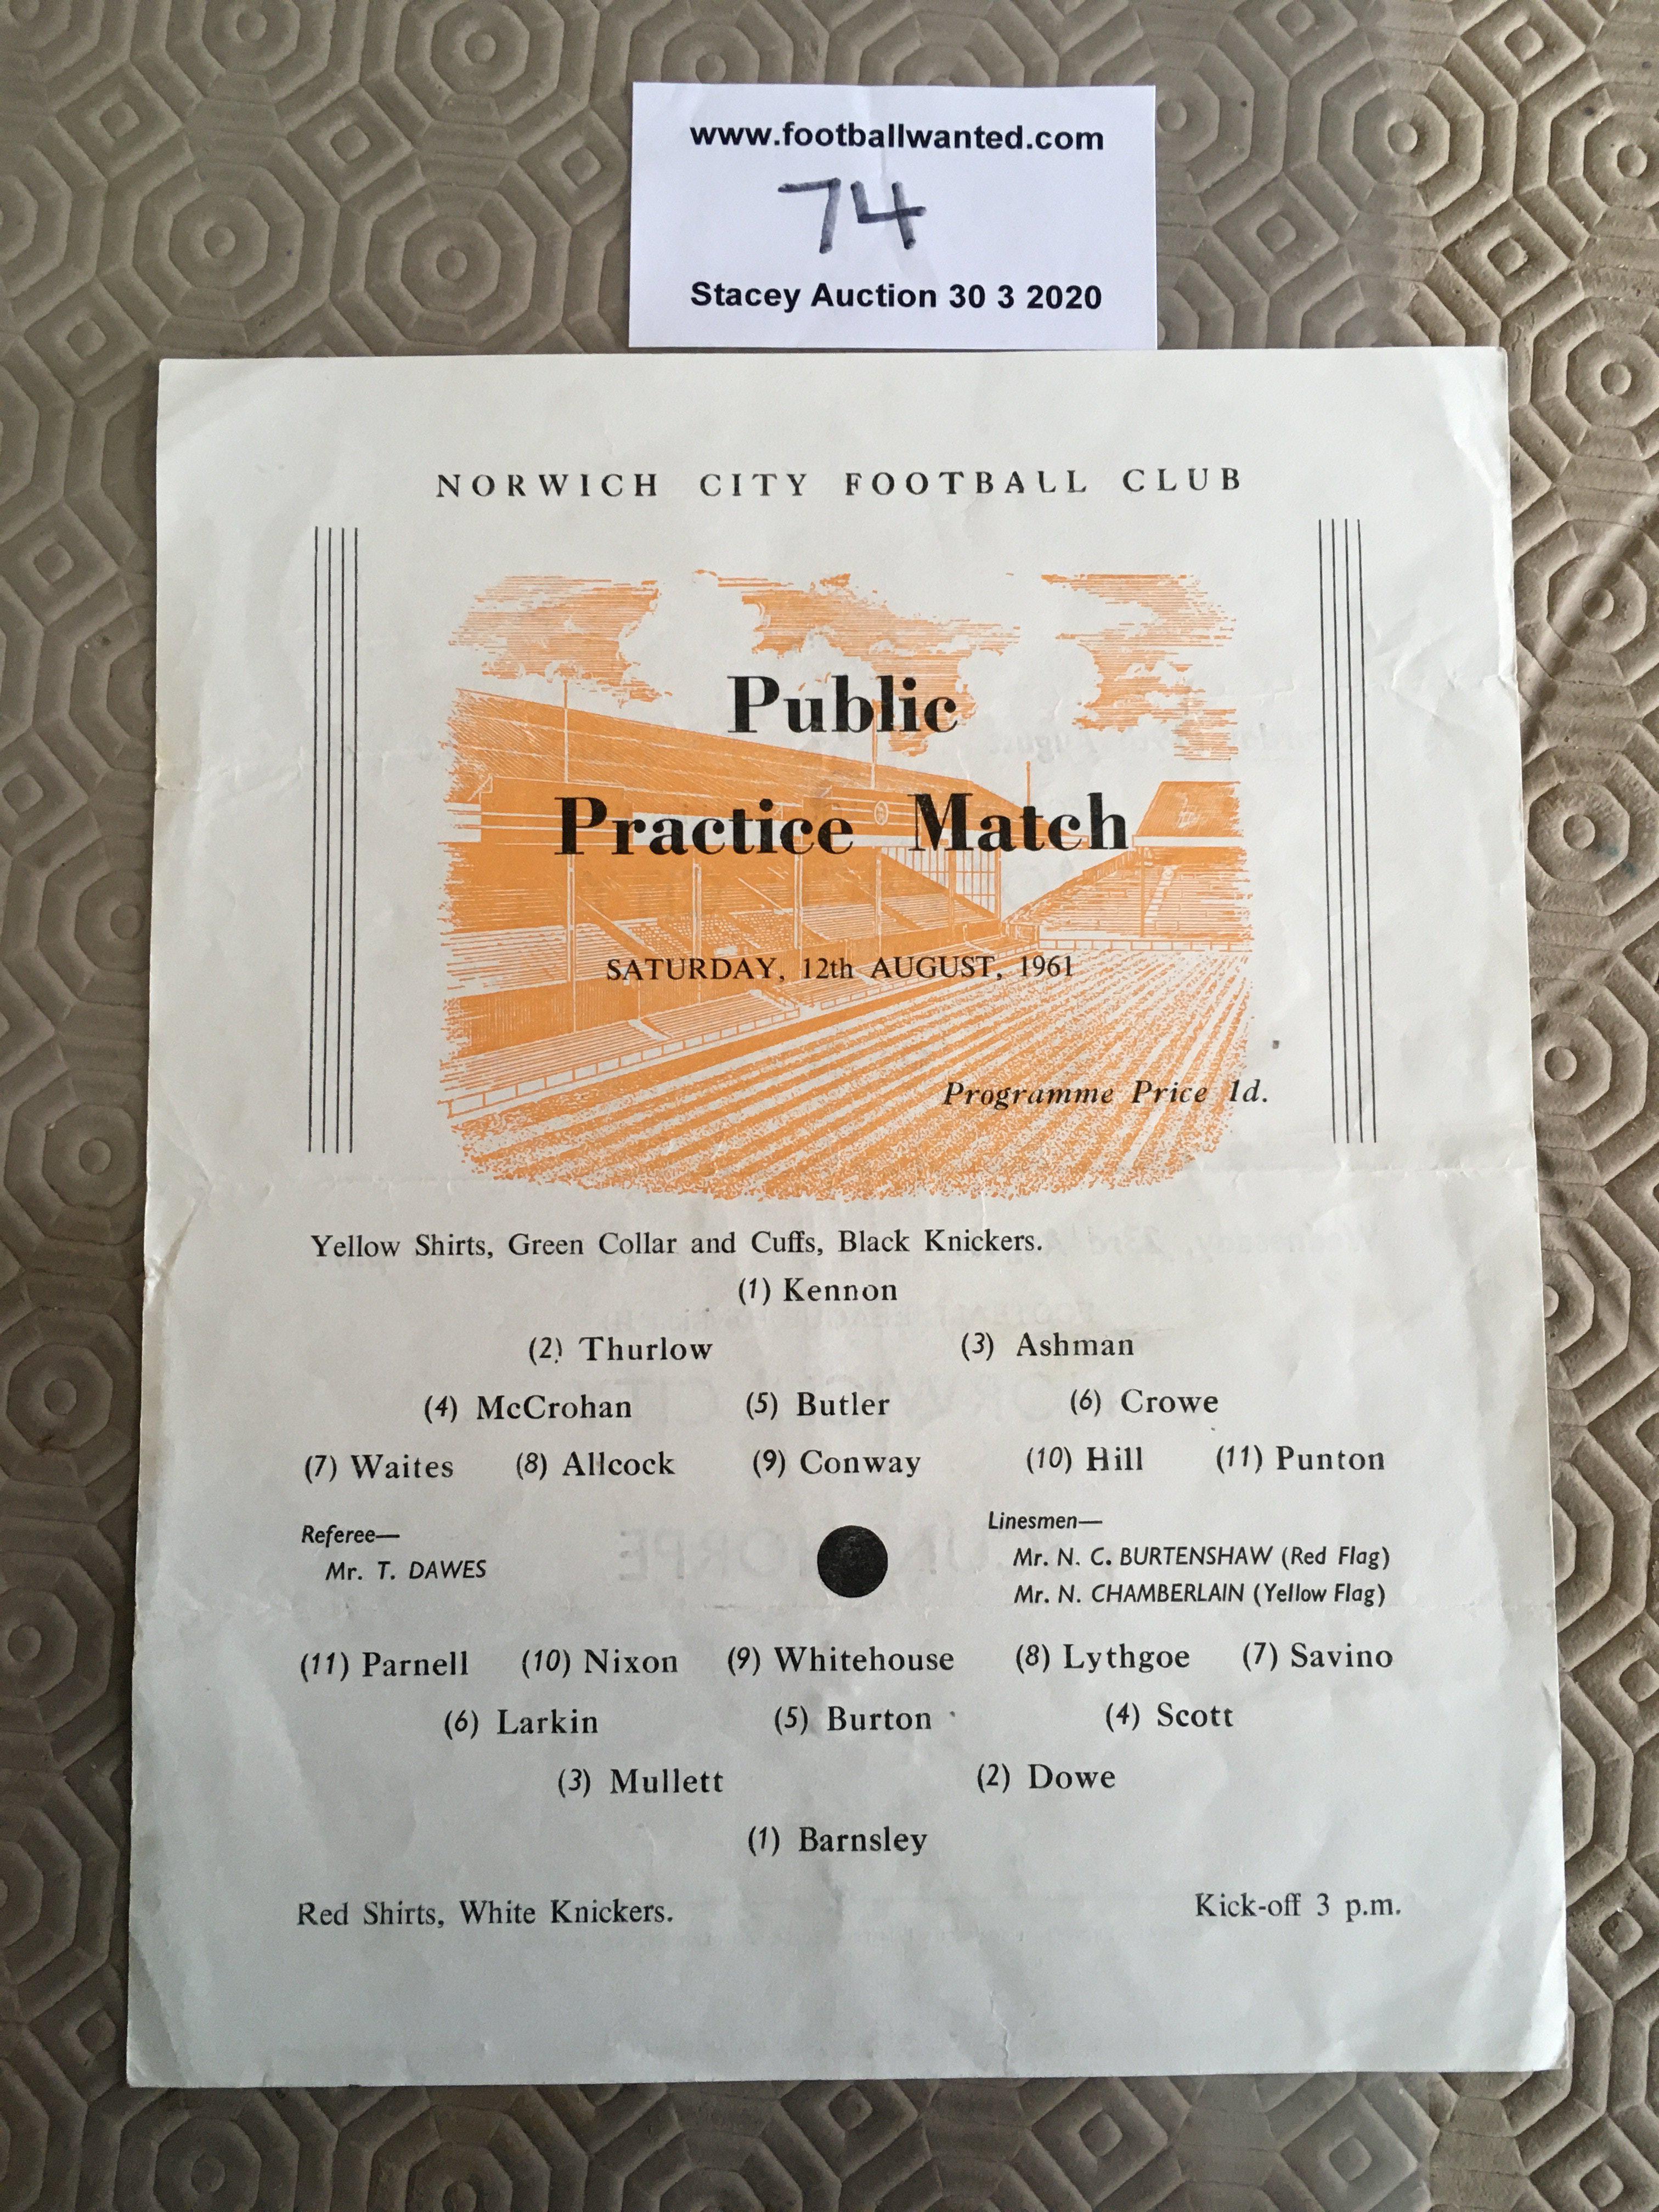 61/62 Norwich City Practice Match Football Programme: Single sheet in good condition with no writing